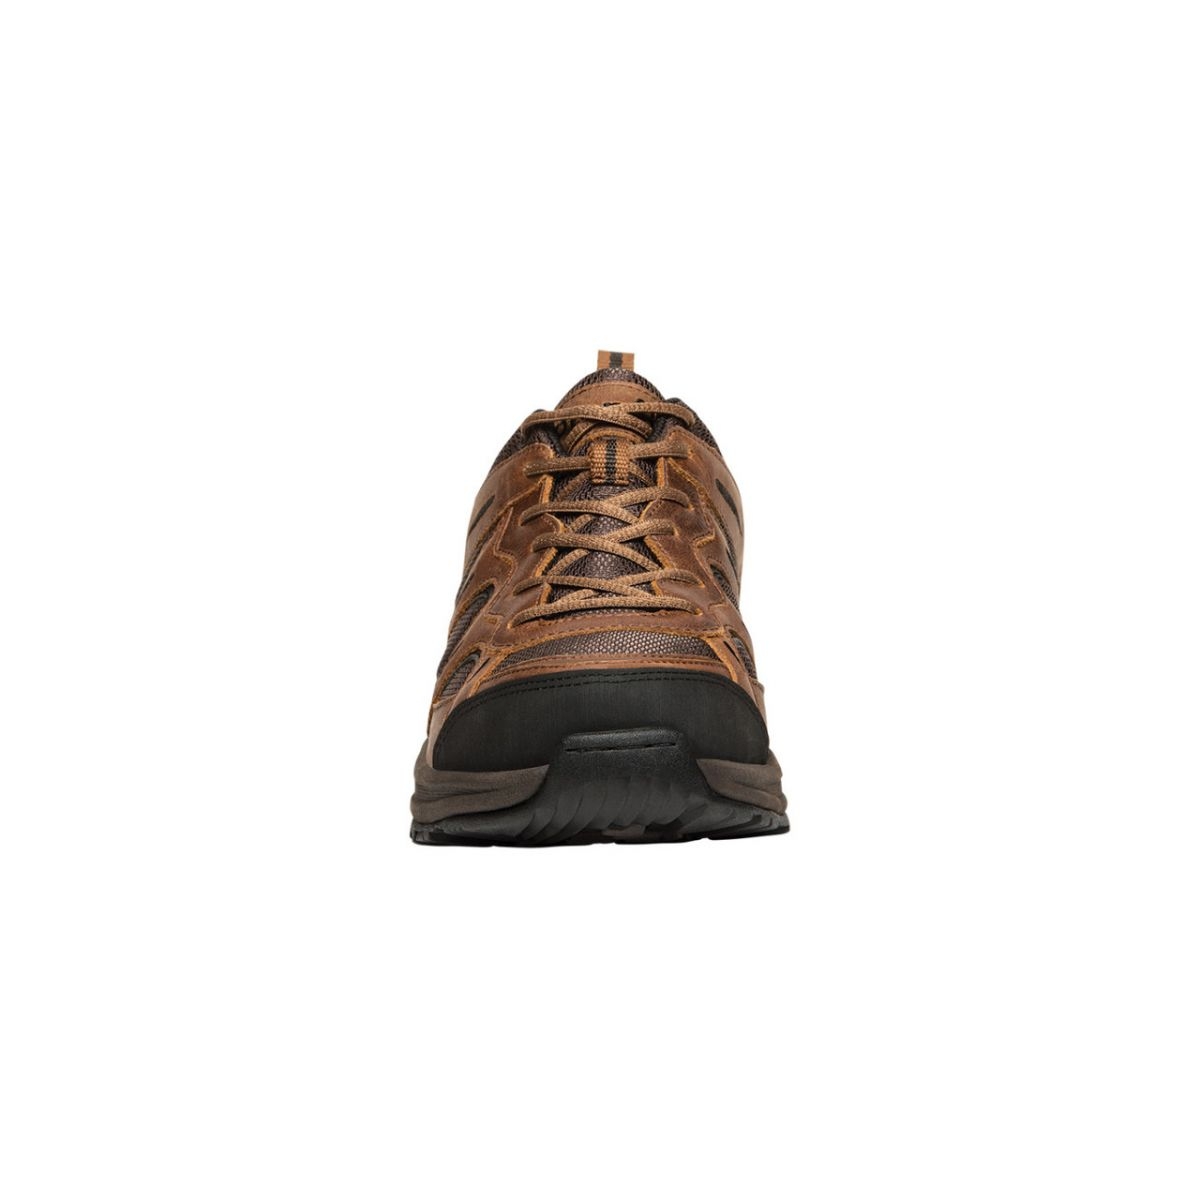 Propet Men's Connelly Hiking Shoe Brown - M5503BR BROWN - BROWN, 8.5-3E